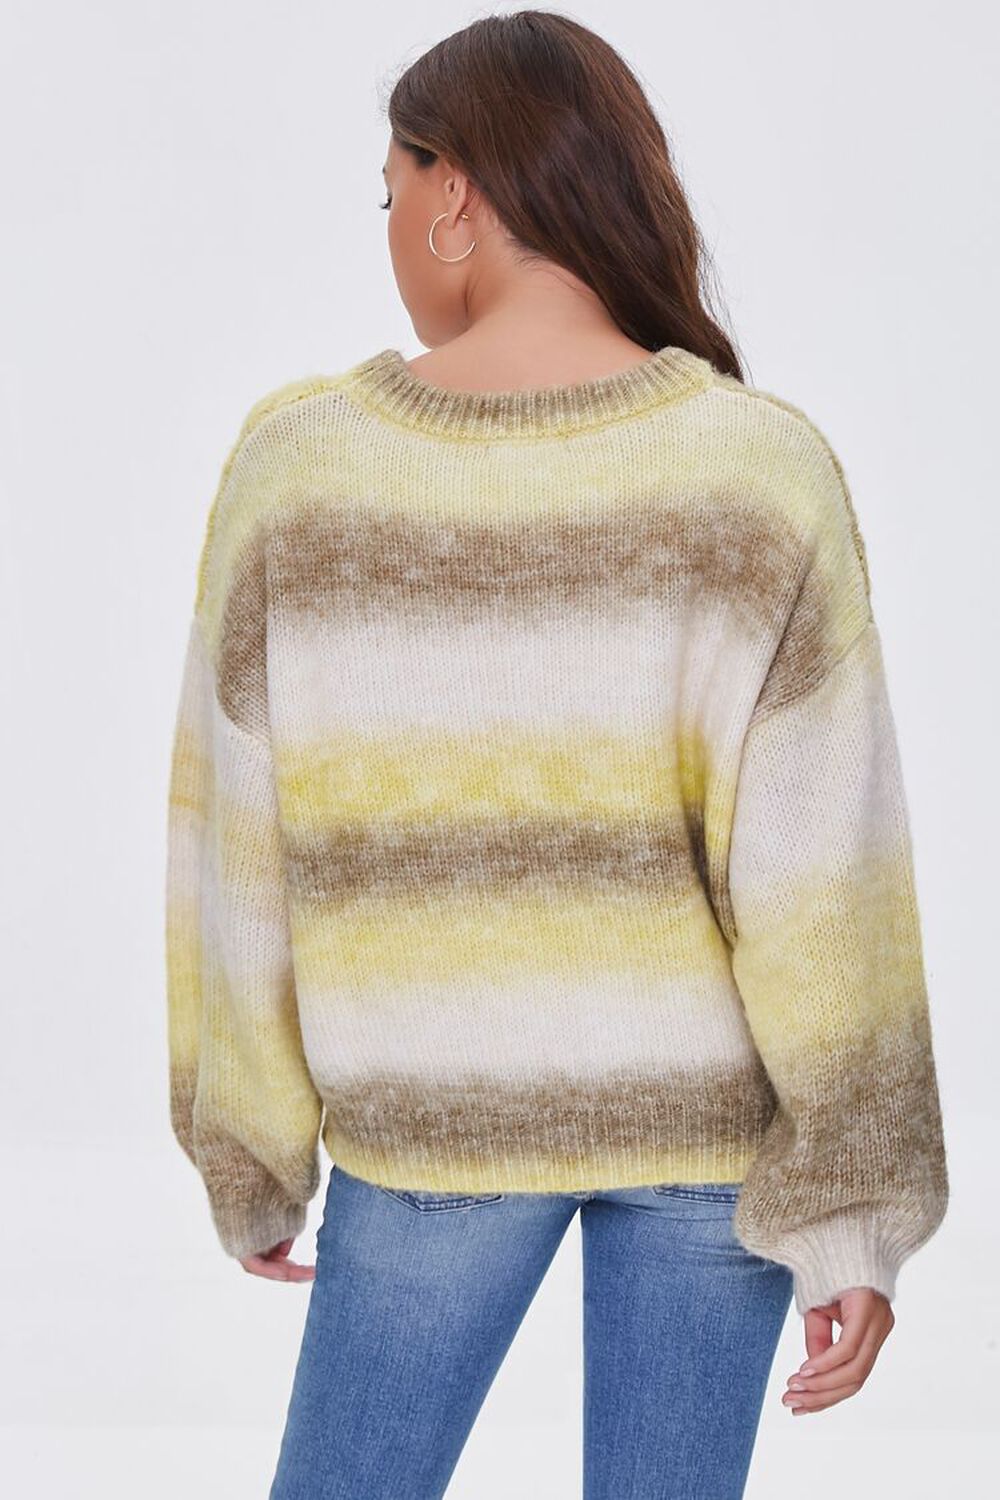 GREEN/MULTI Colorblock Cable Knit Sweater, image 3